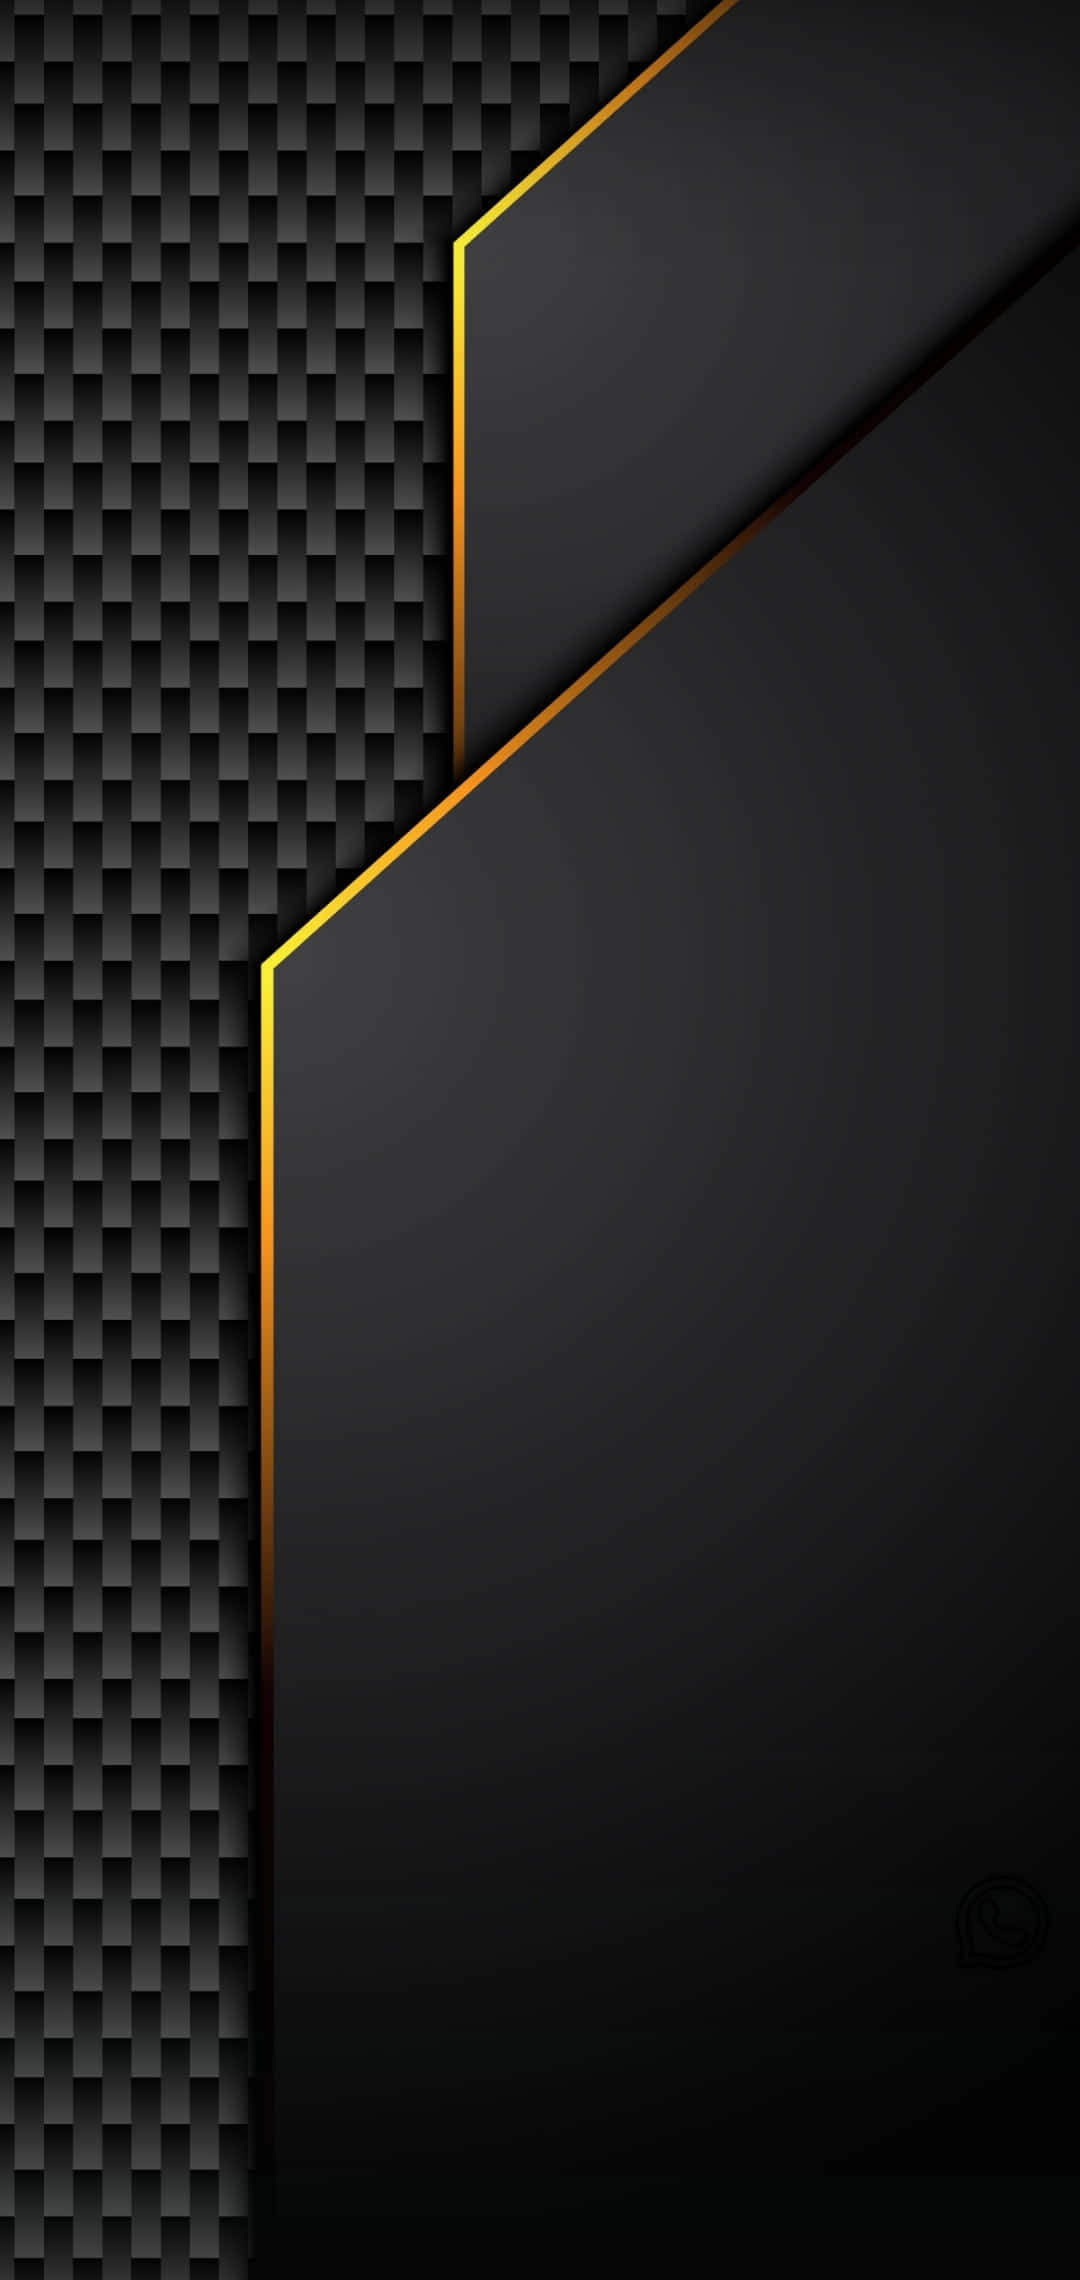 Aggregate more than 51 black gold wallpaper - in.cdgdbentre